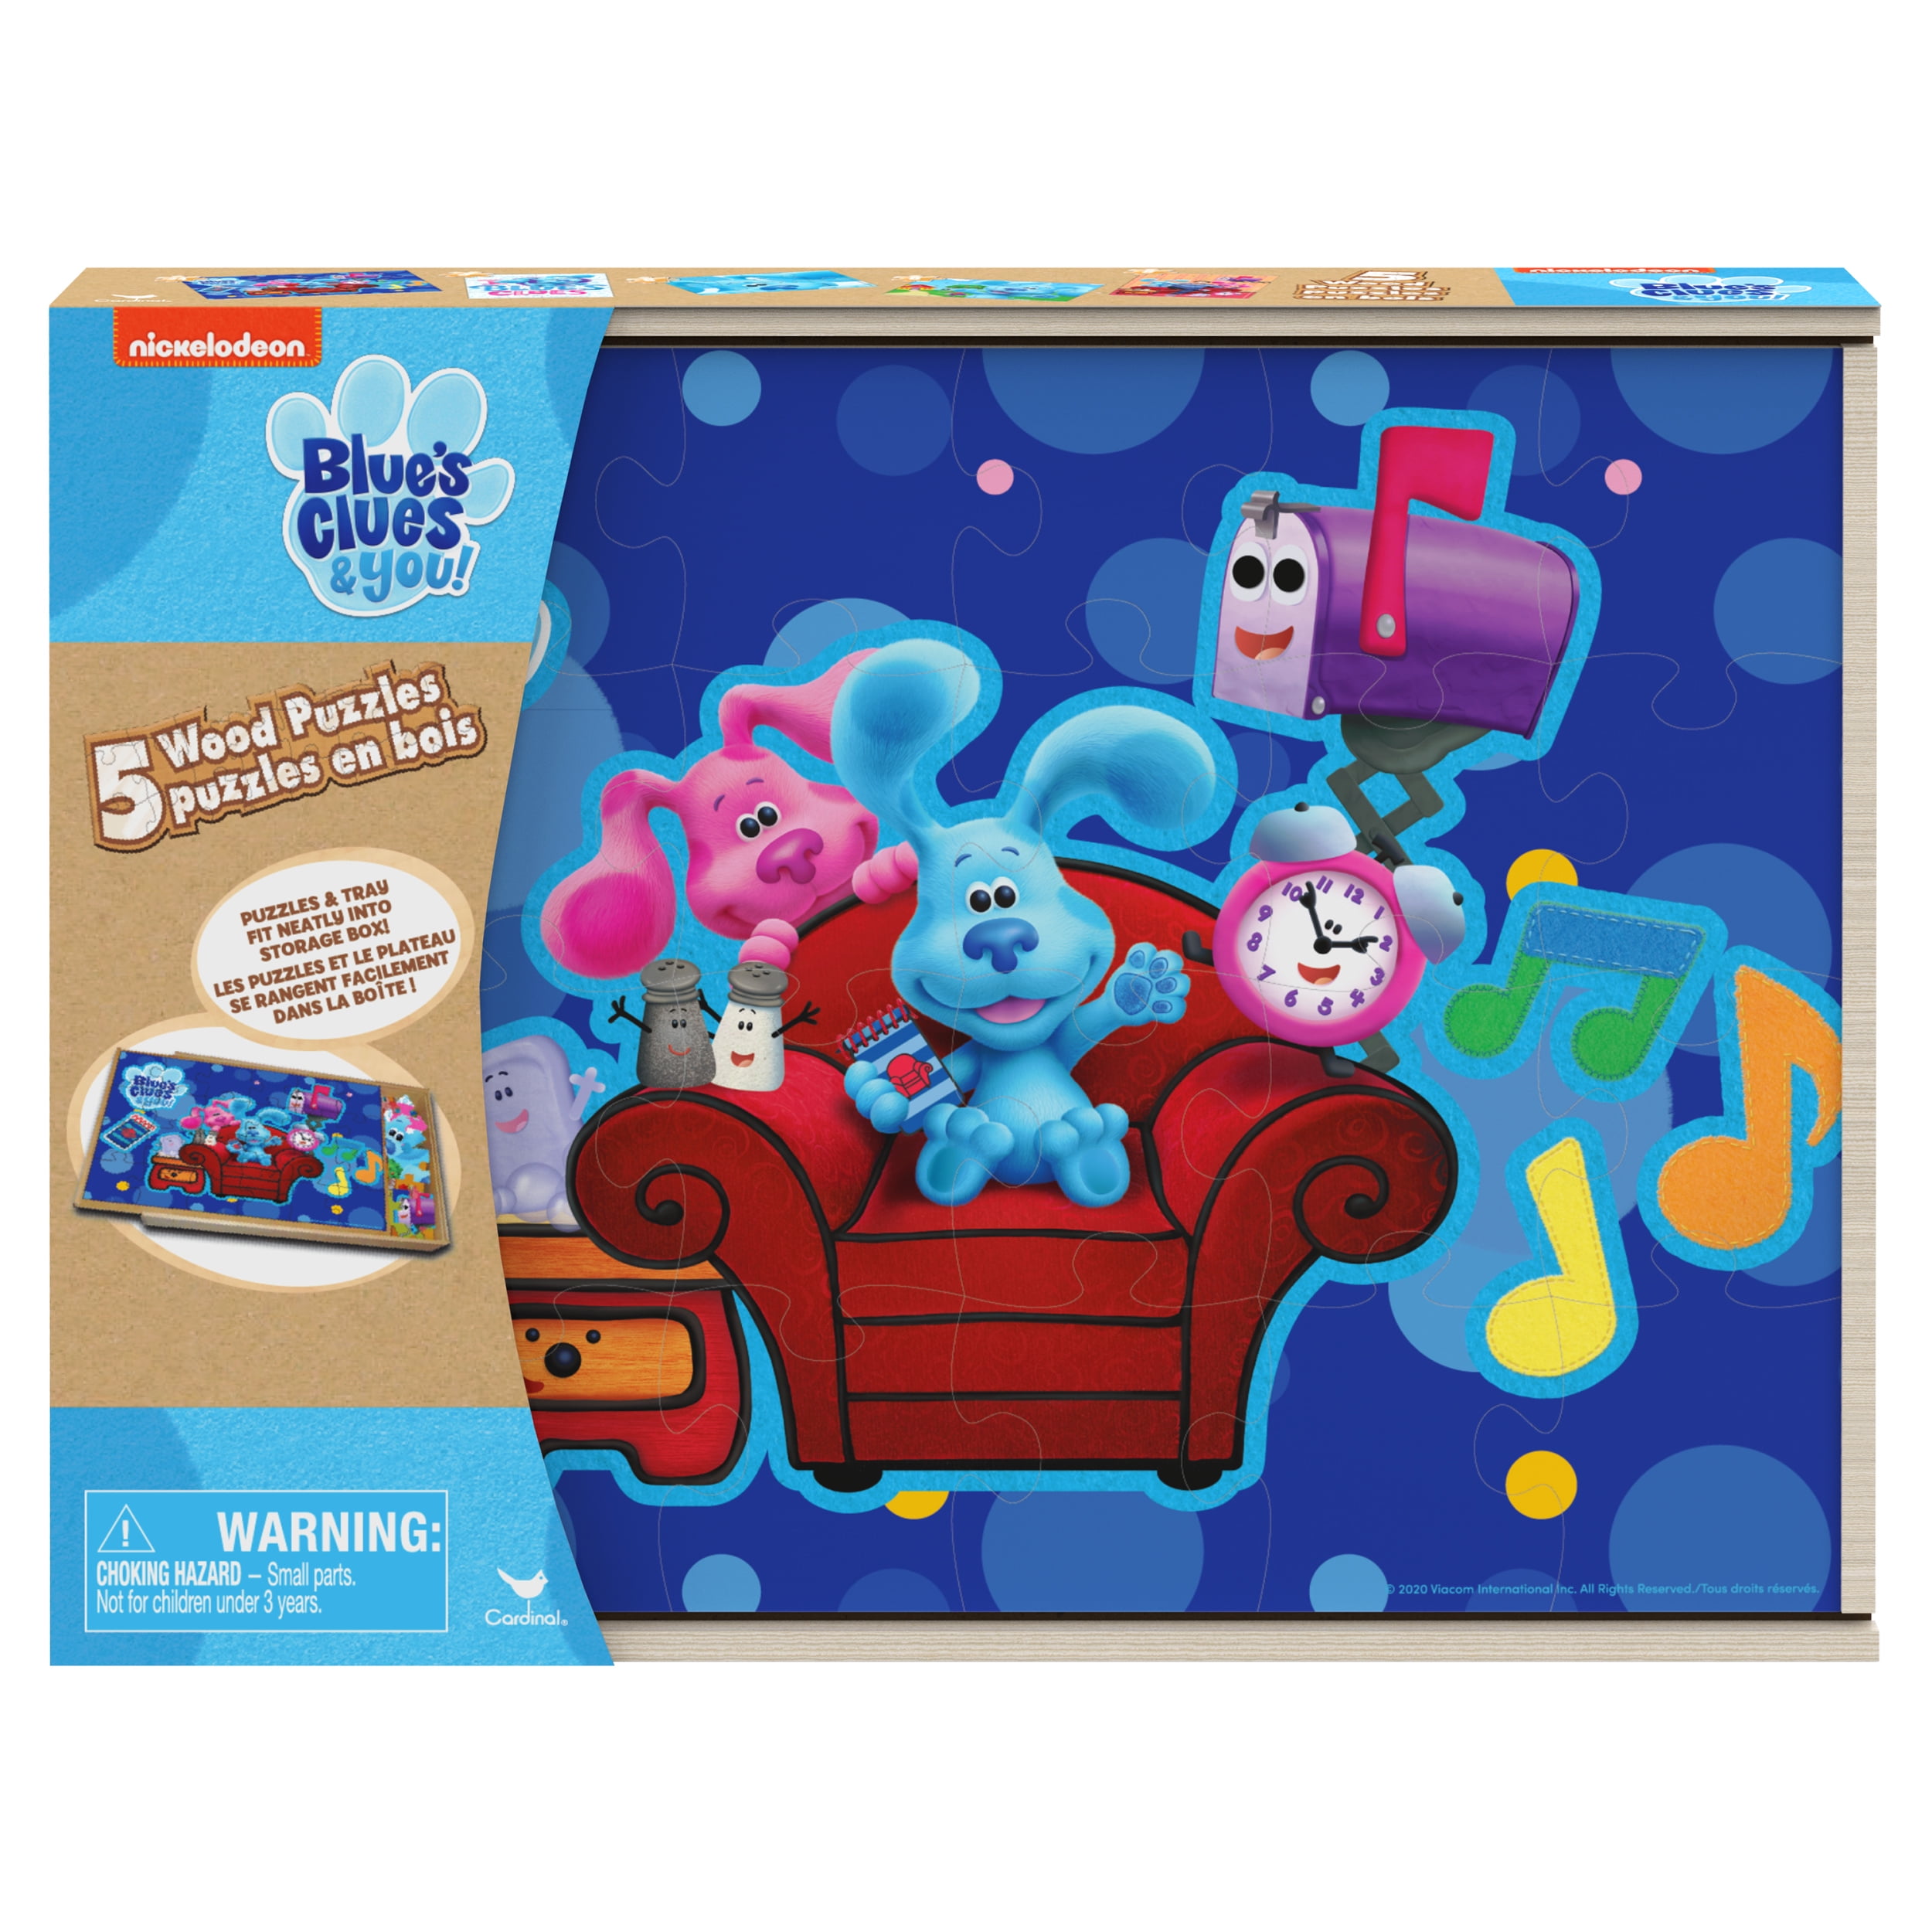 CGSignLab Ghost Aged Blue Window Cling 5-Pack New Years Sale 36x24 